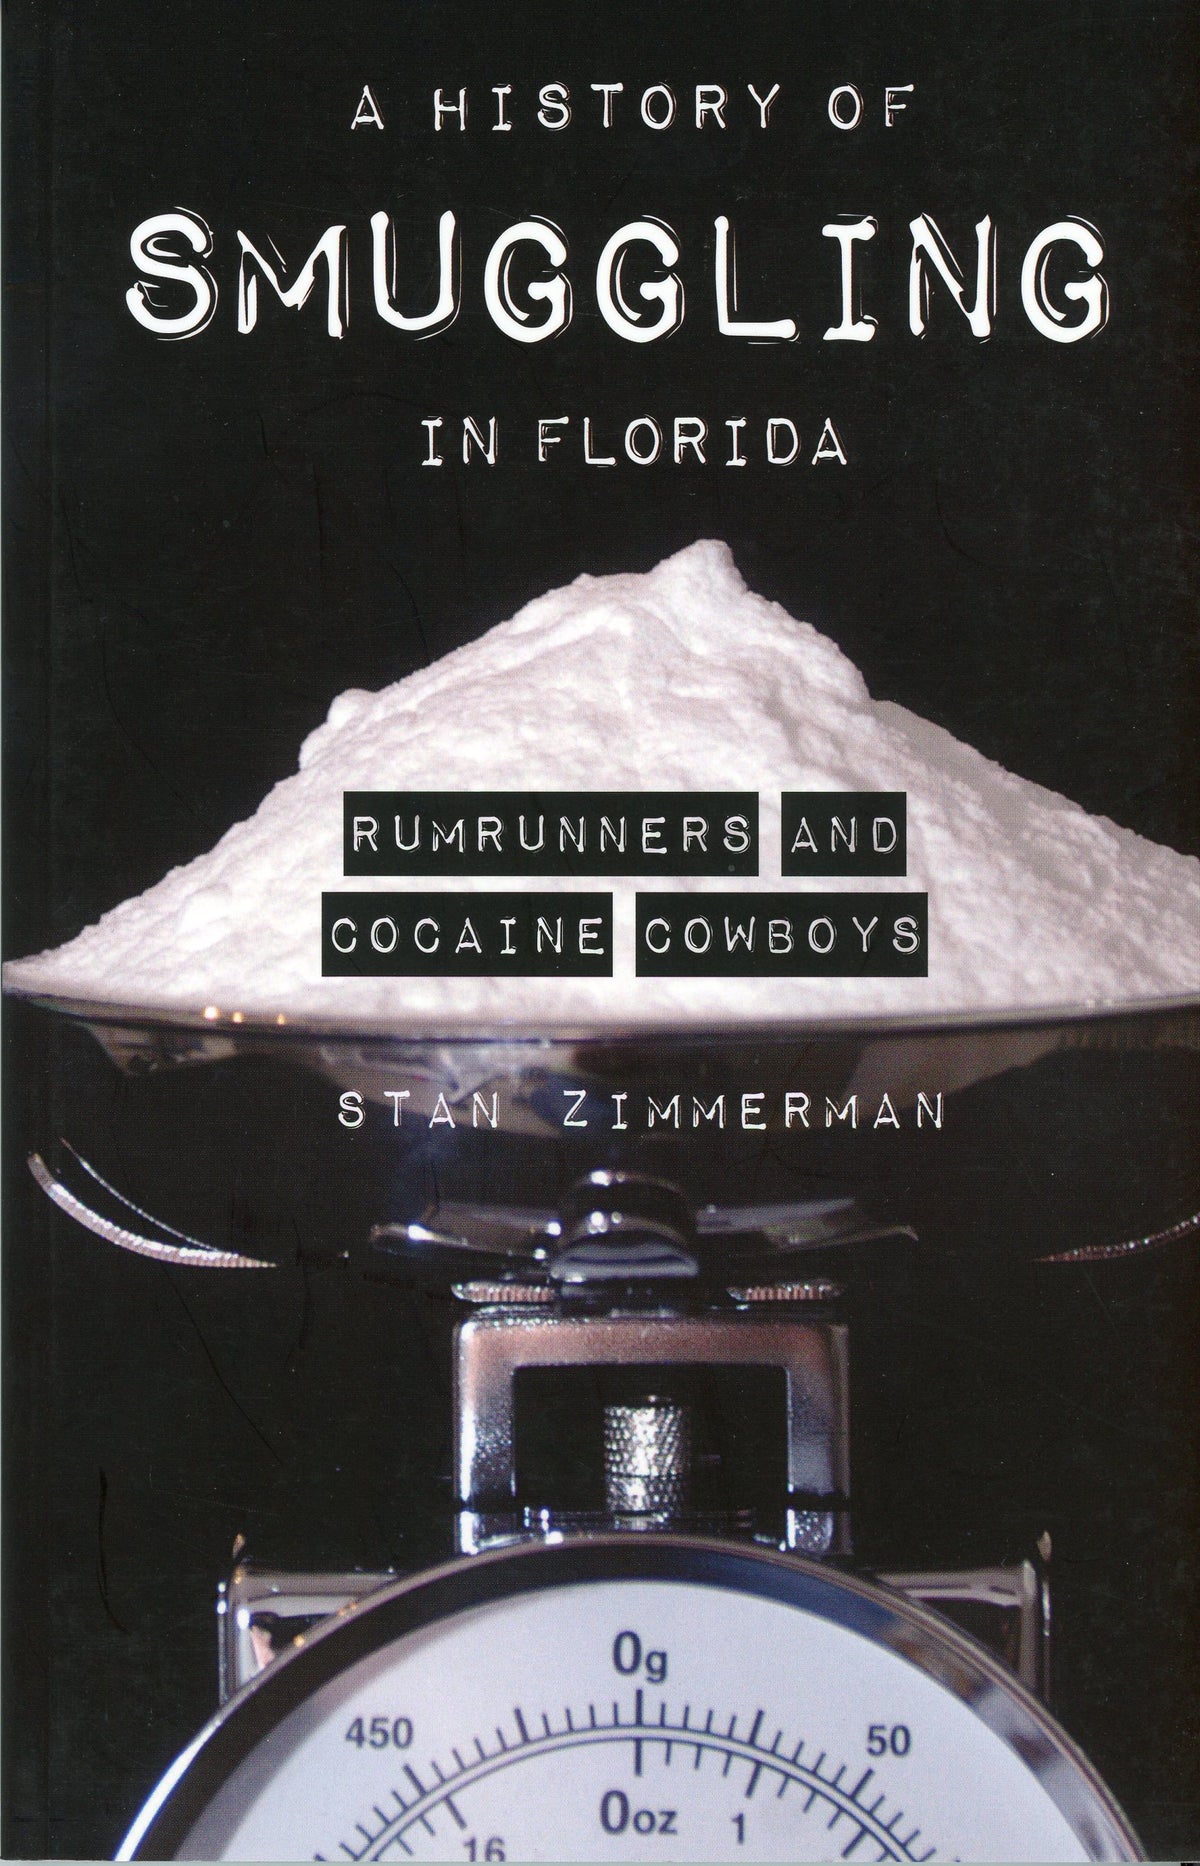 A History of Smuggling in Florida: Rumrunners and Cocaine Cowboys